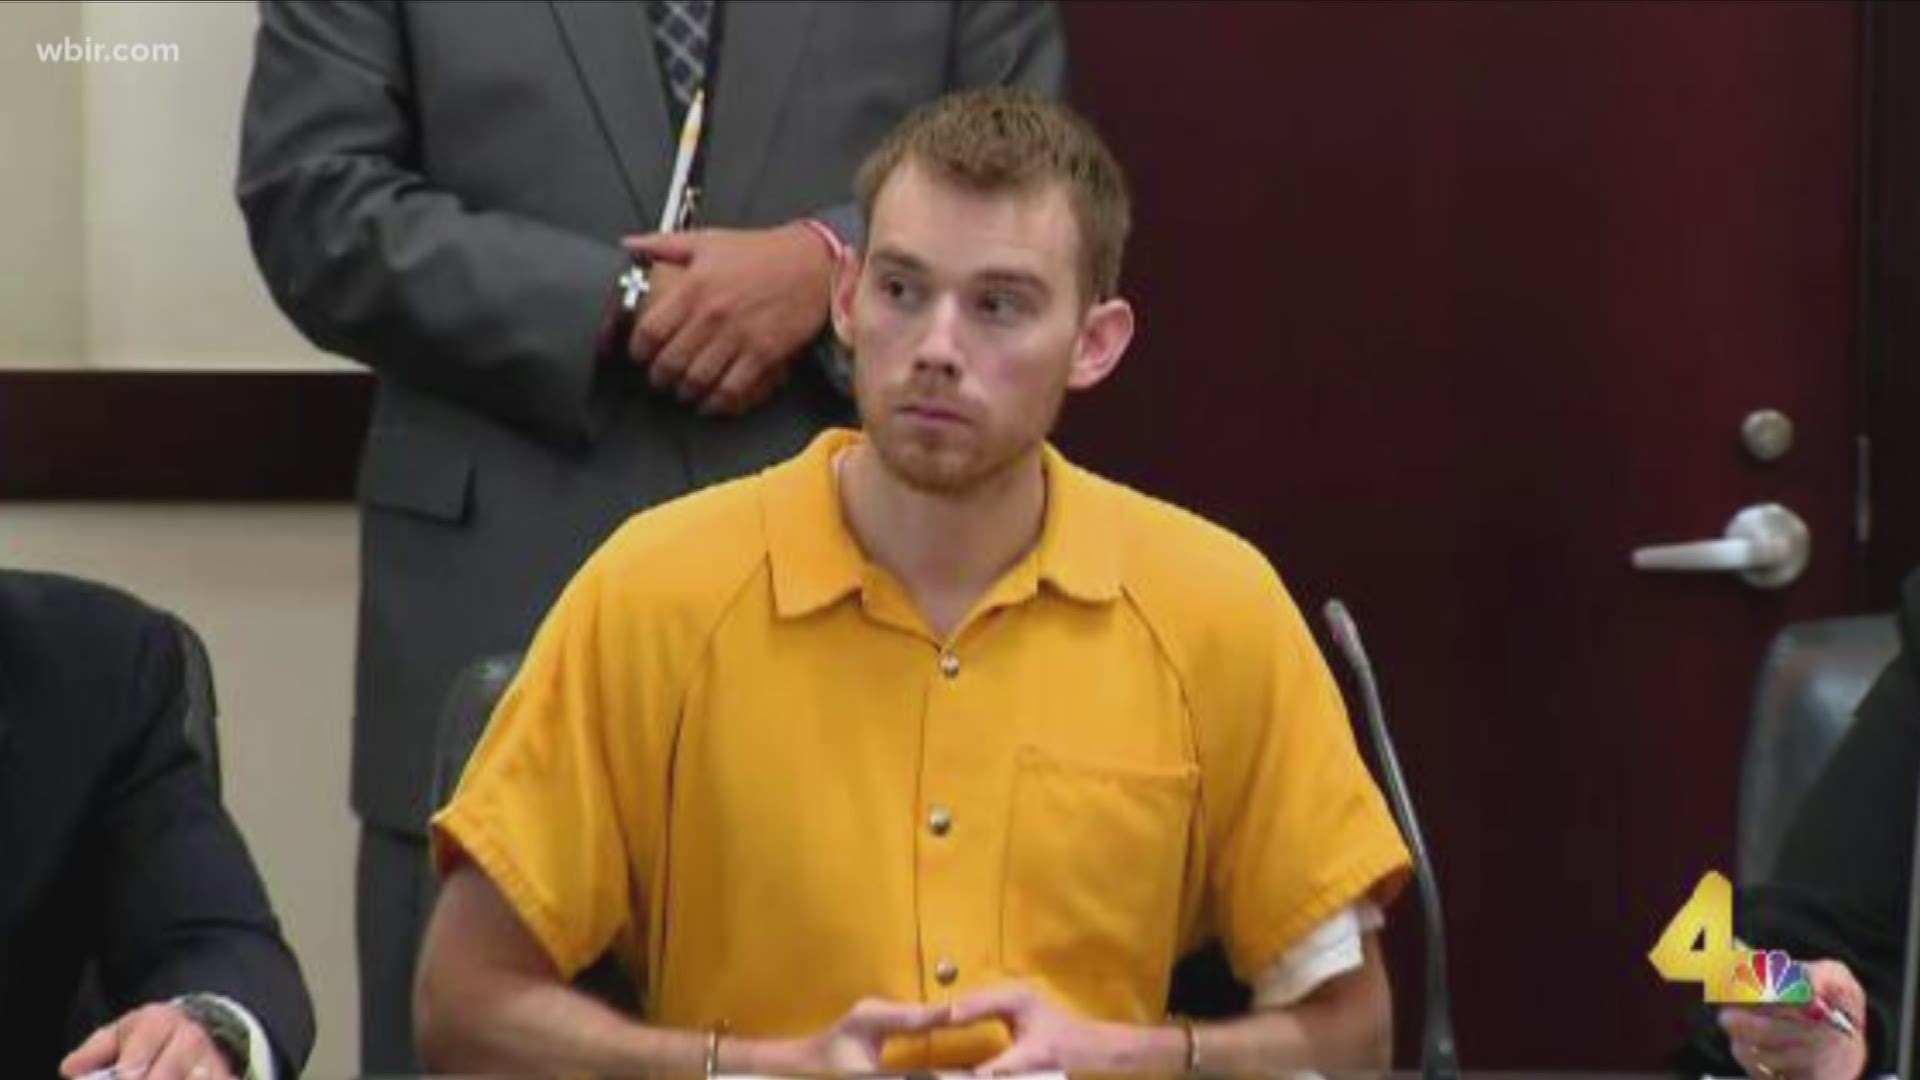 The father of the accused Waffle House shooter is now charged with giving his son a gun.